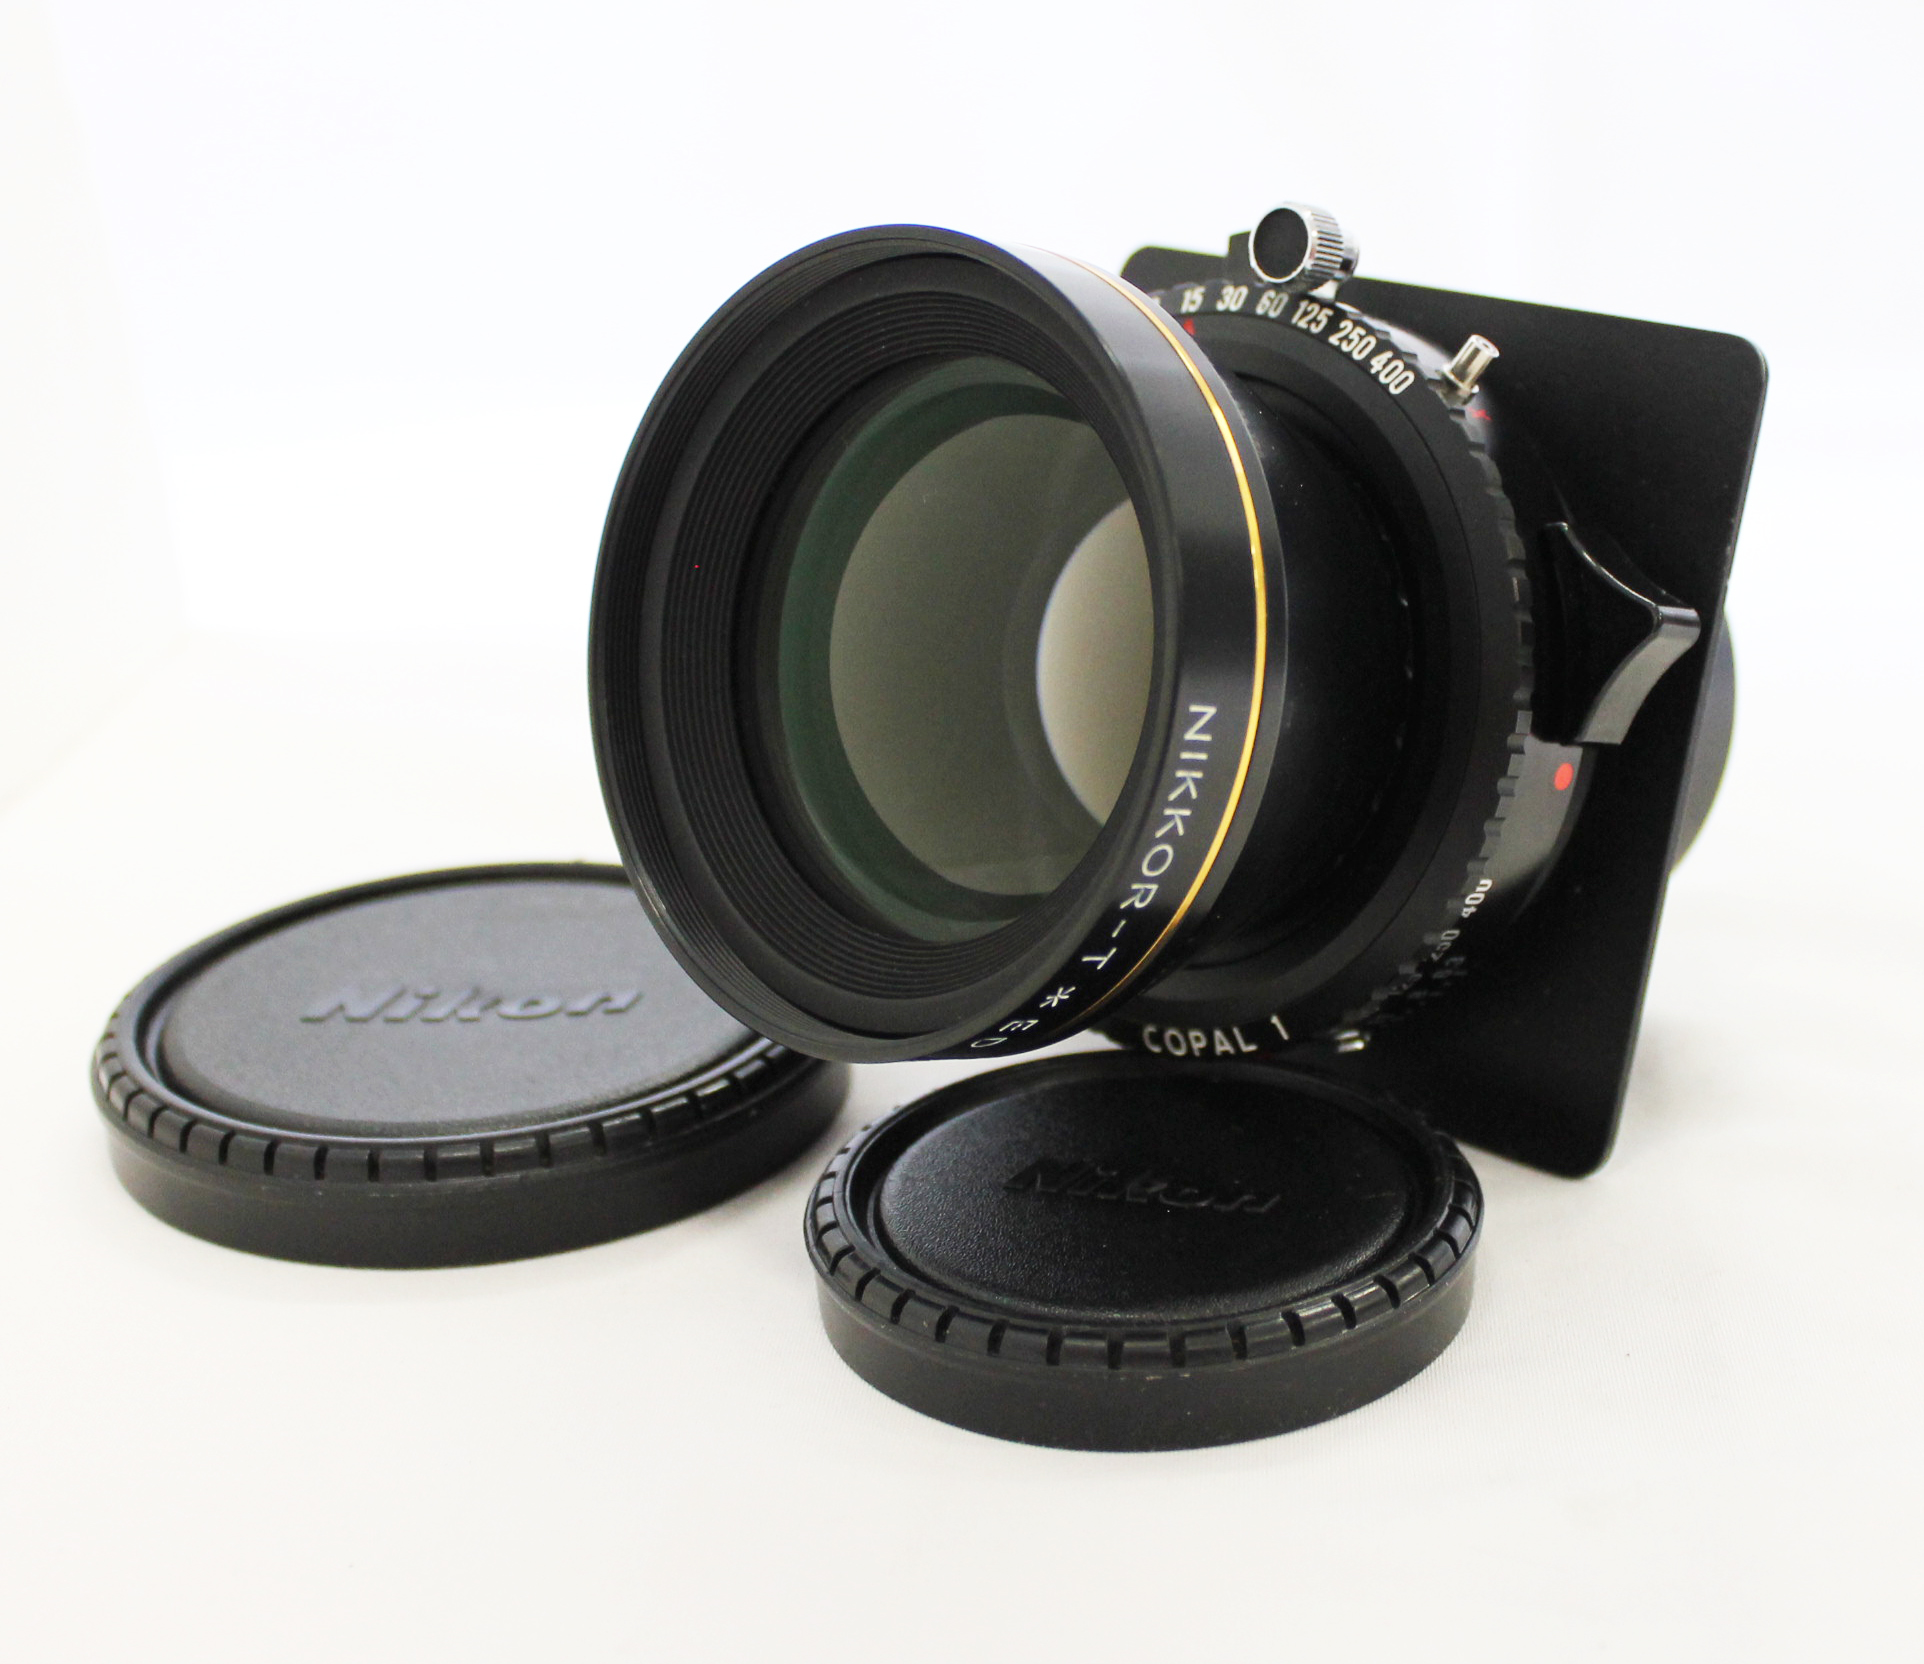 [Near Mint] Nikon NIKKOR-T* ED 270mm F/6.3 Large Format Lens with COPAL 1 Shutter from Japan